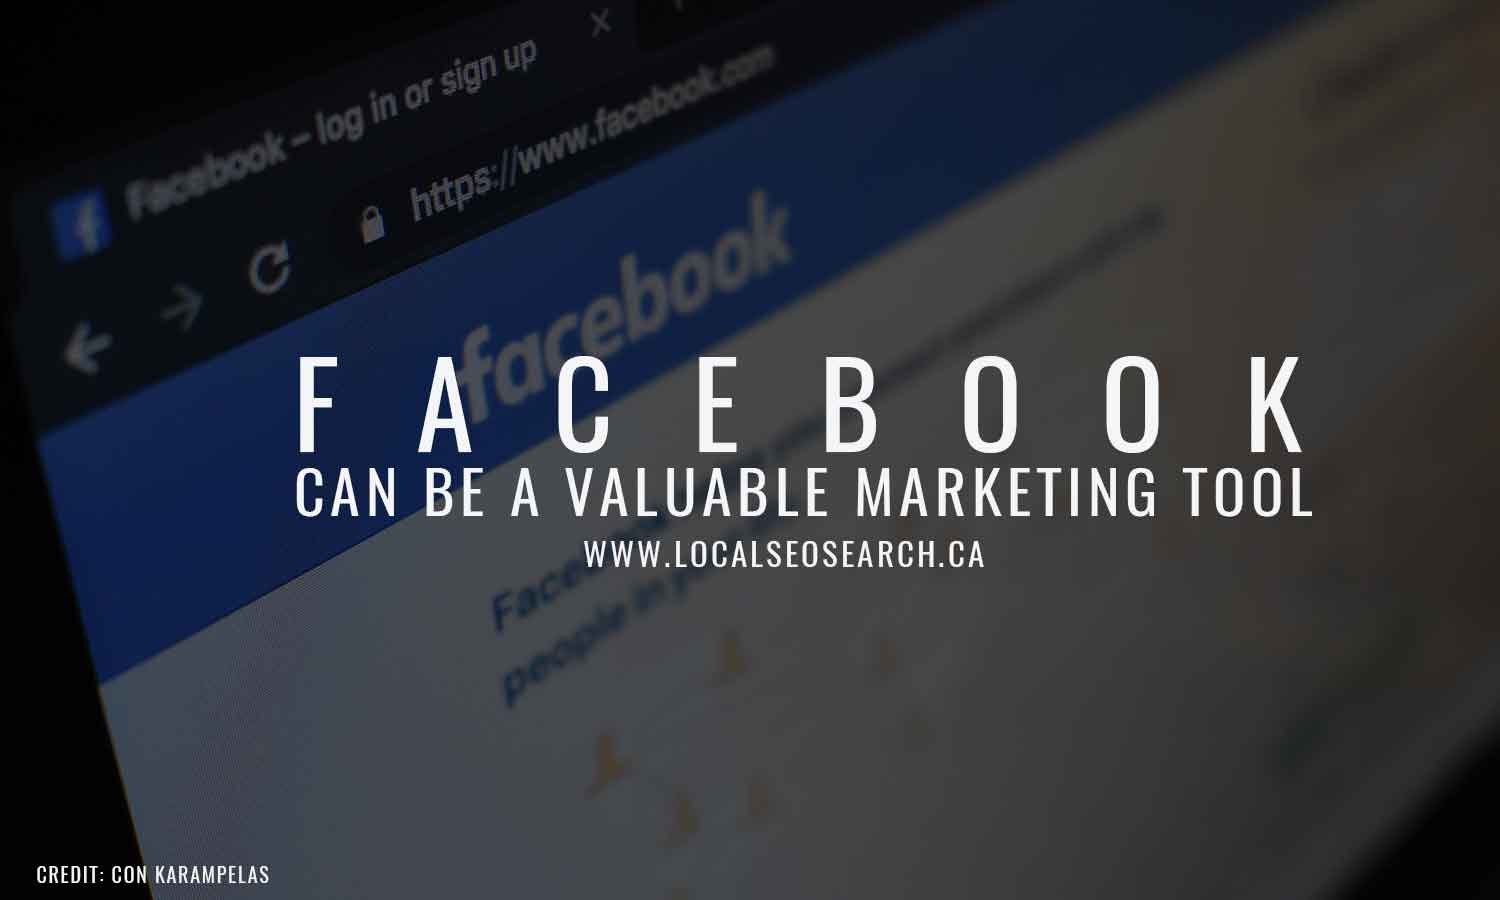 Facebook can be a valuable marketing tool